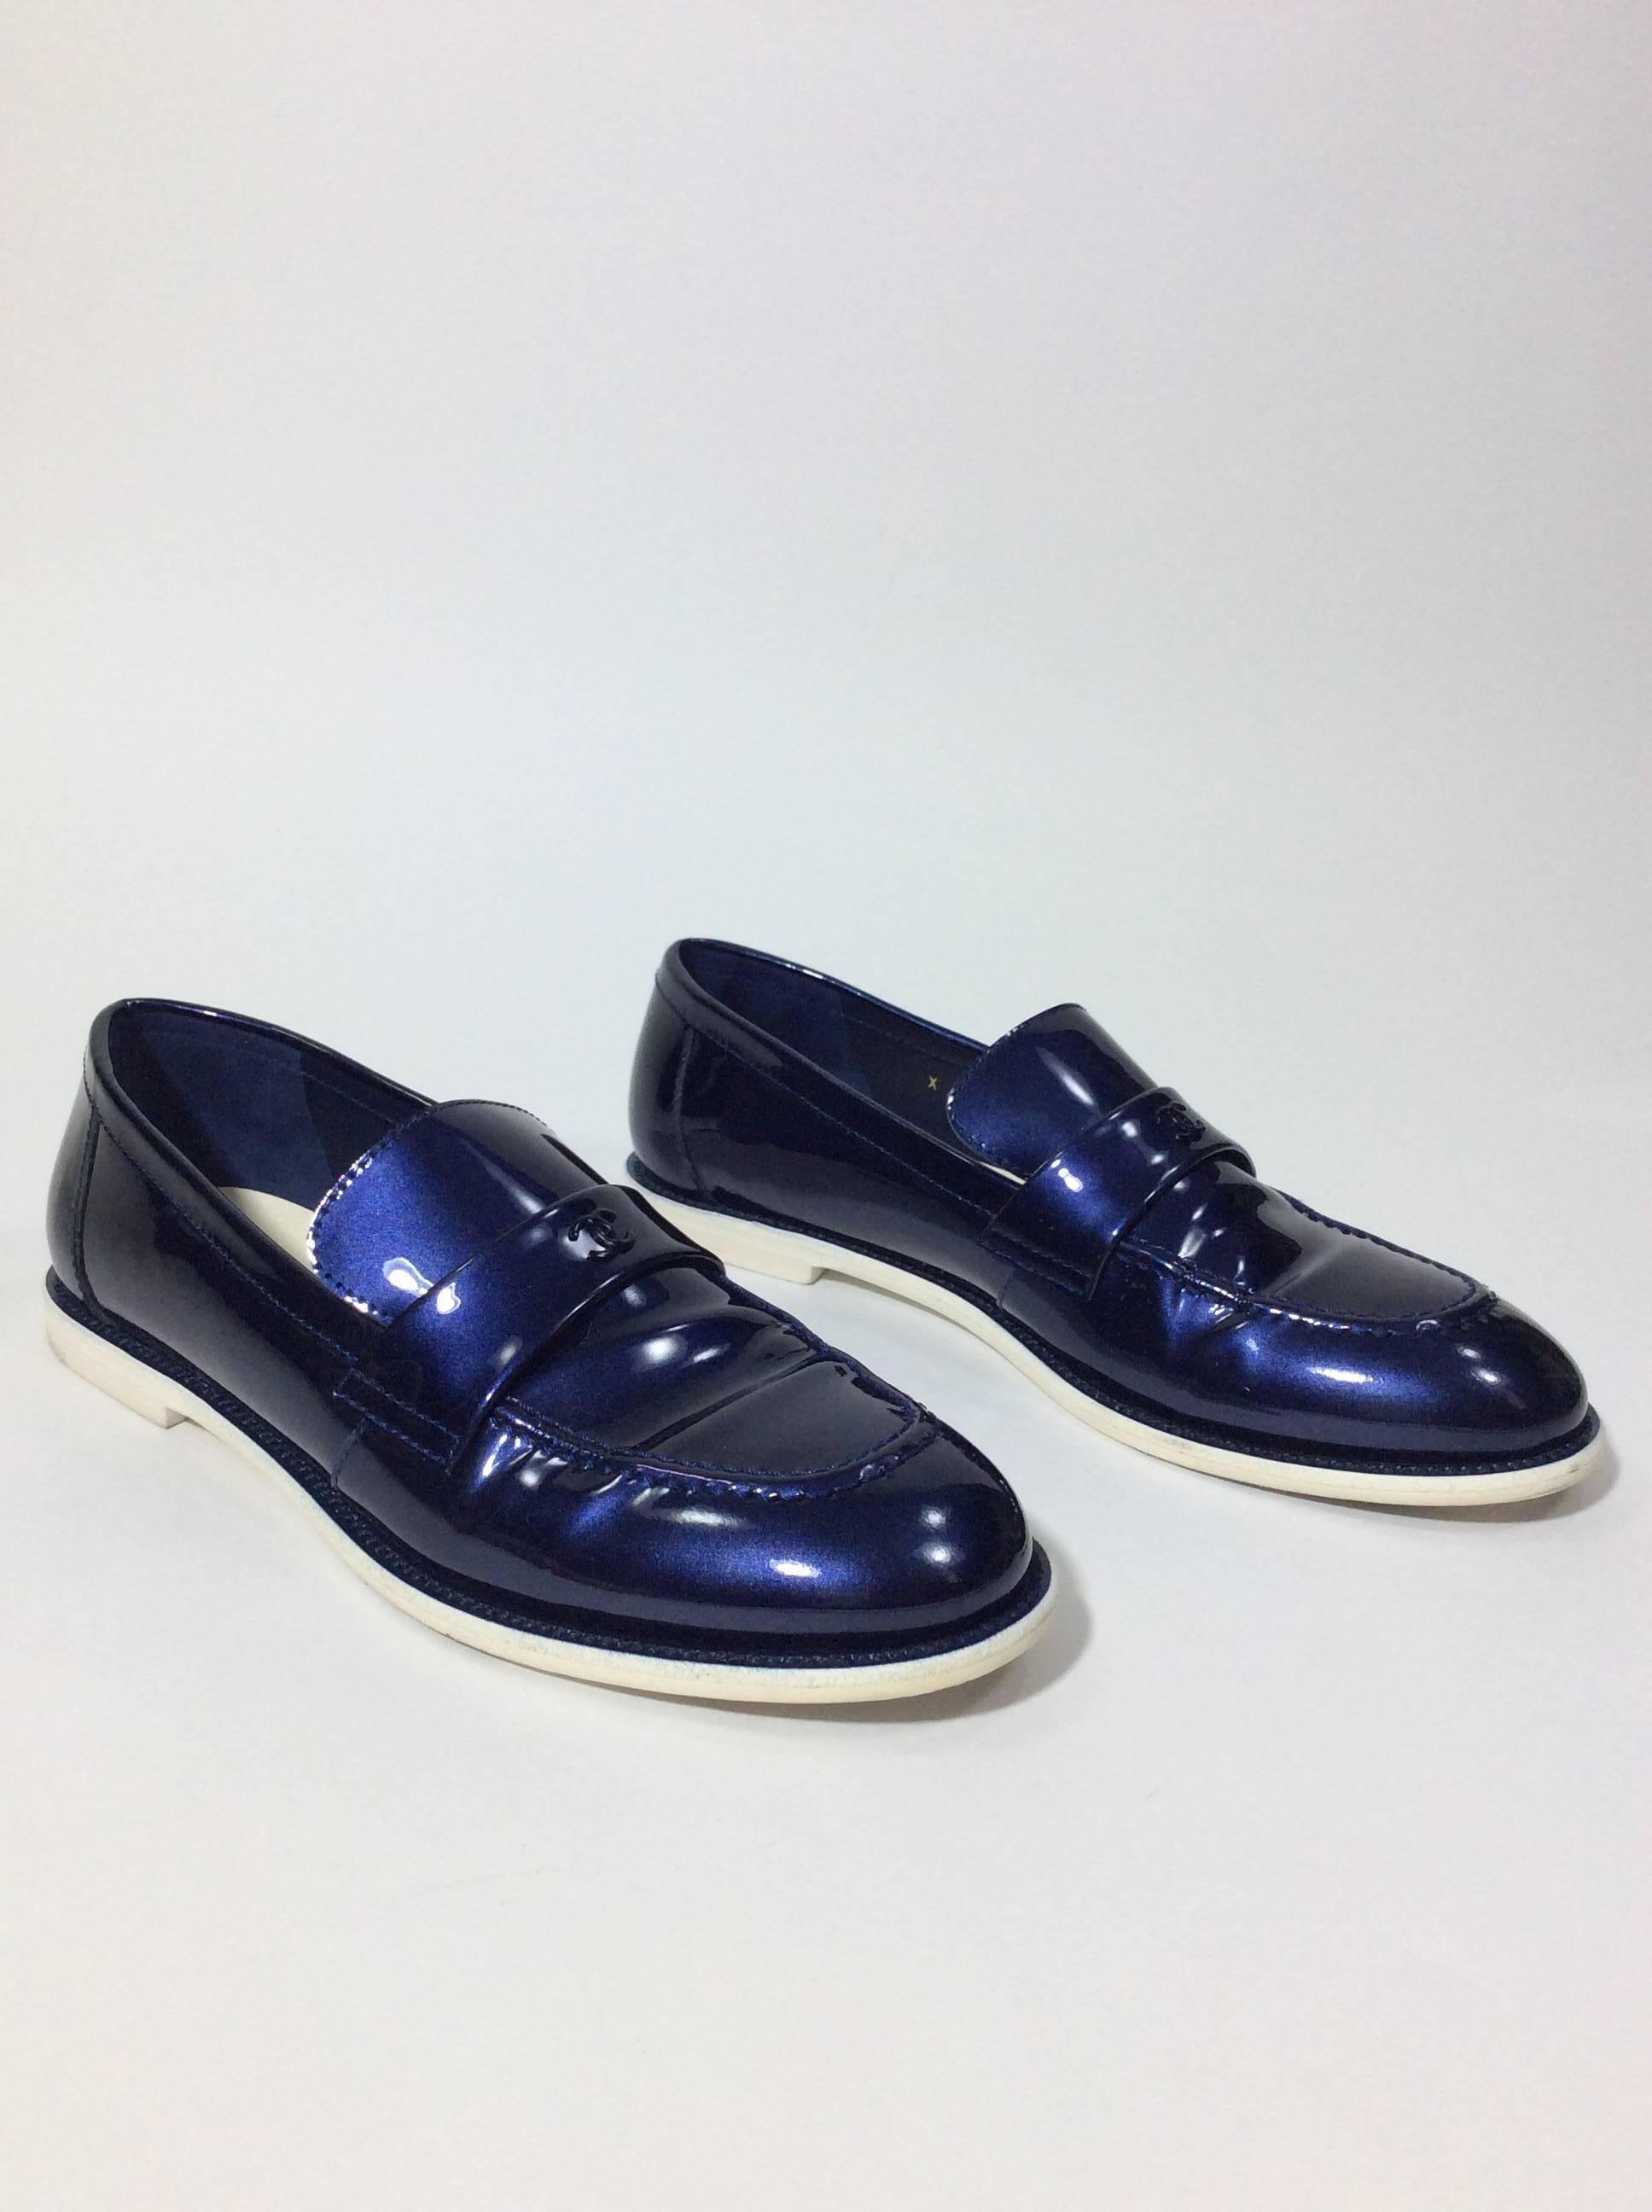 Black Chanel Patent Leather Midnight Blue Loafer Shoe For Sale